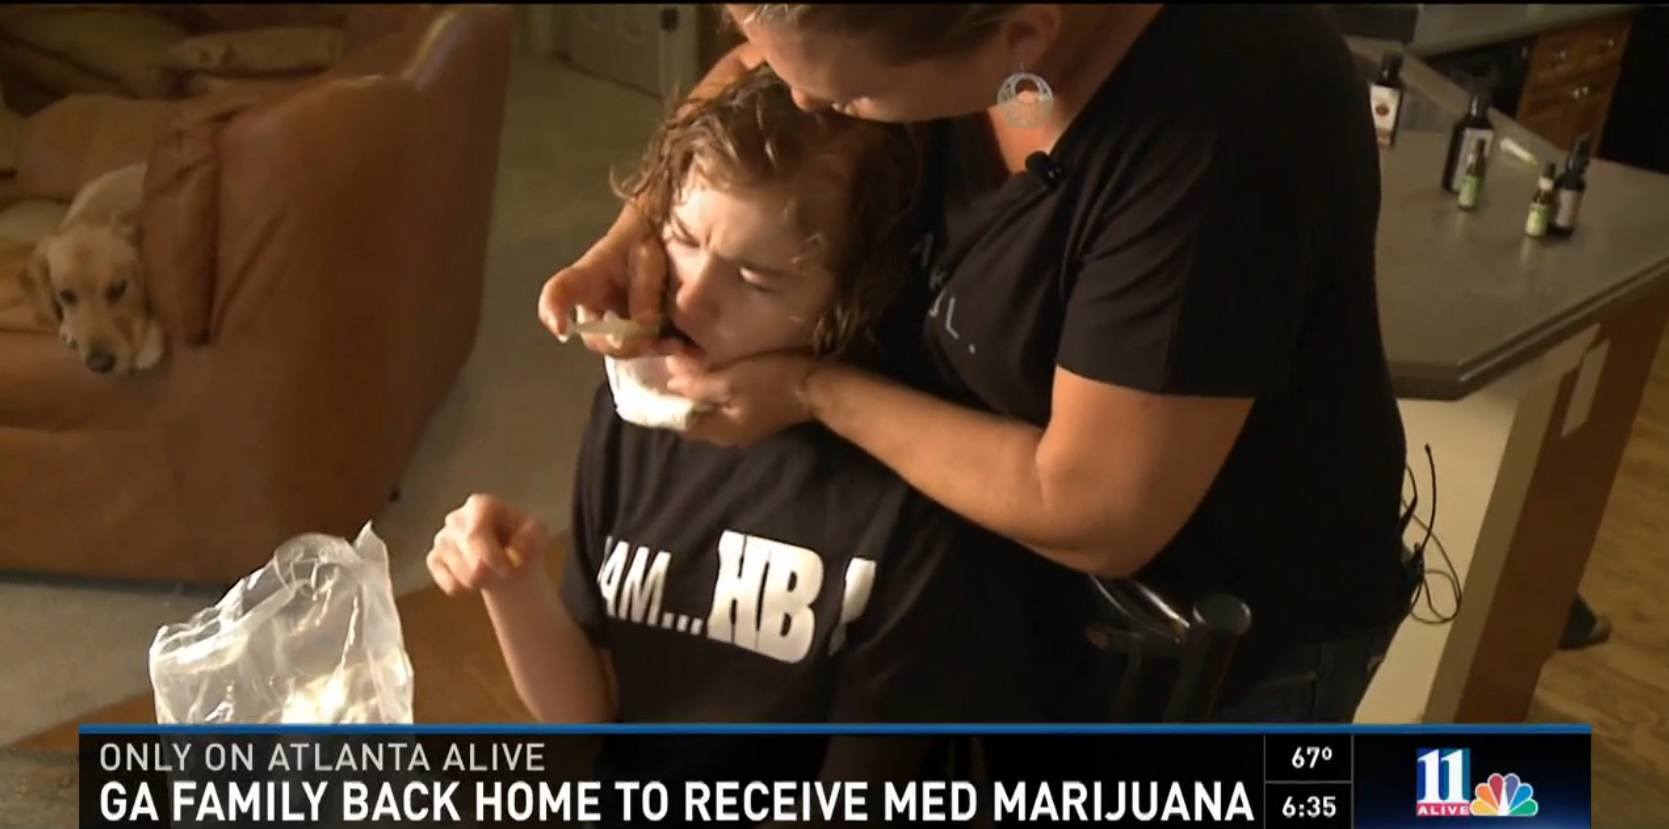 Image of Corey Lowe giving her daughter CBD Oil for her seizures